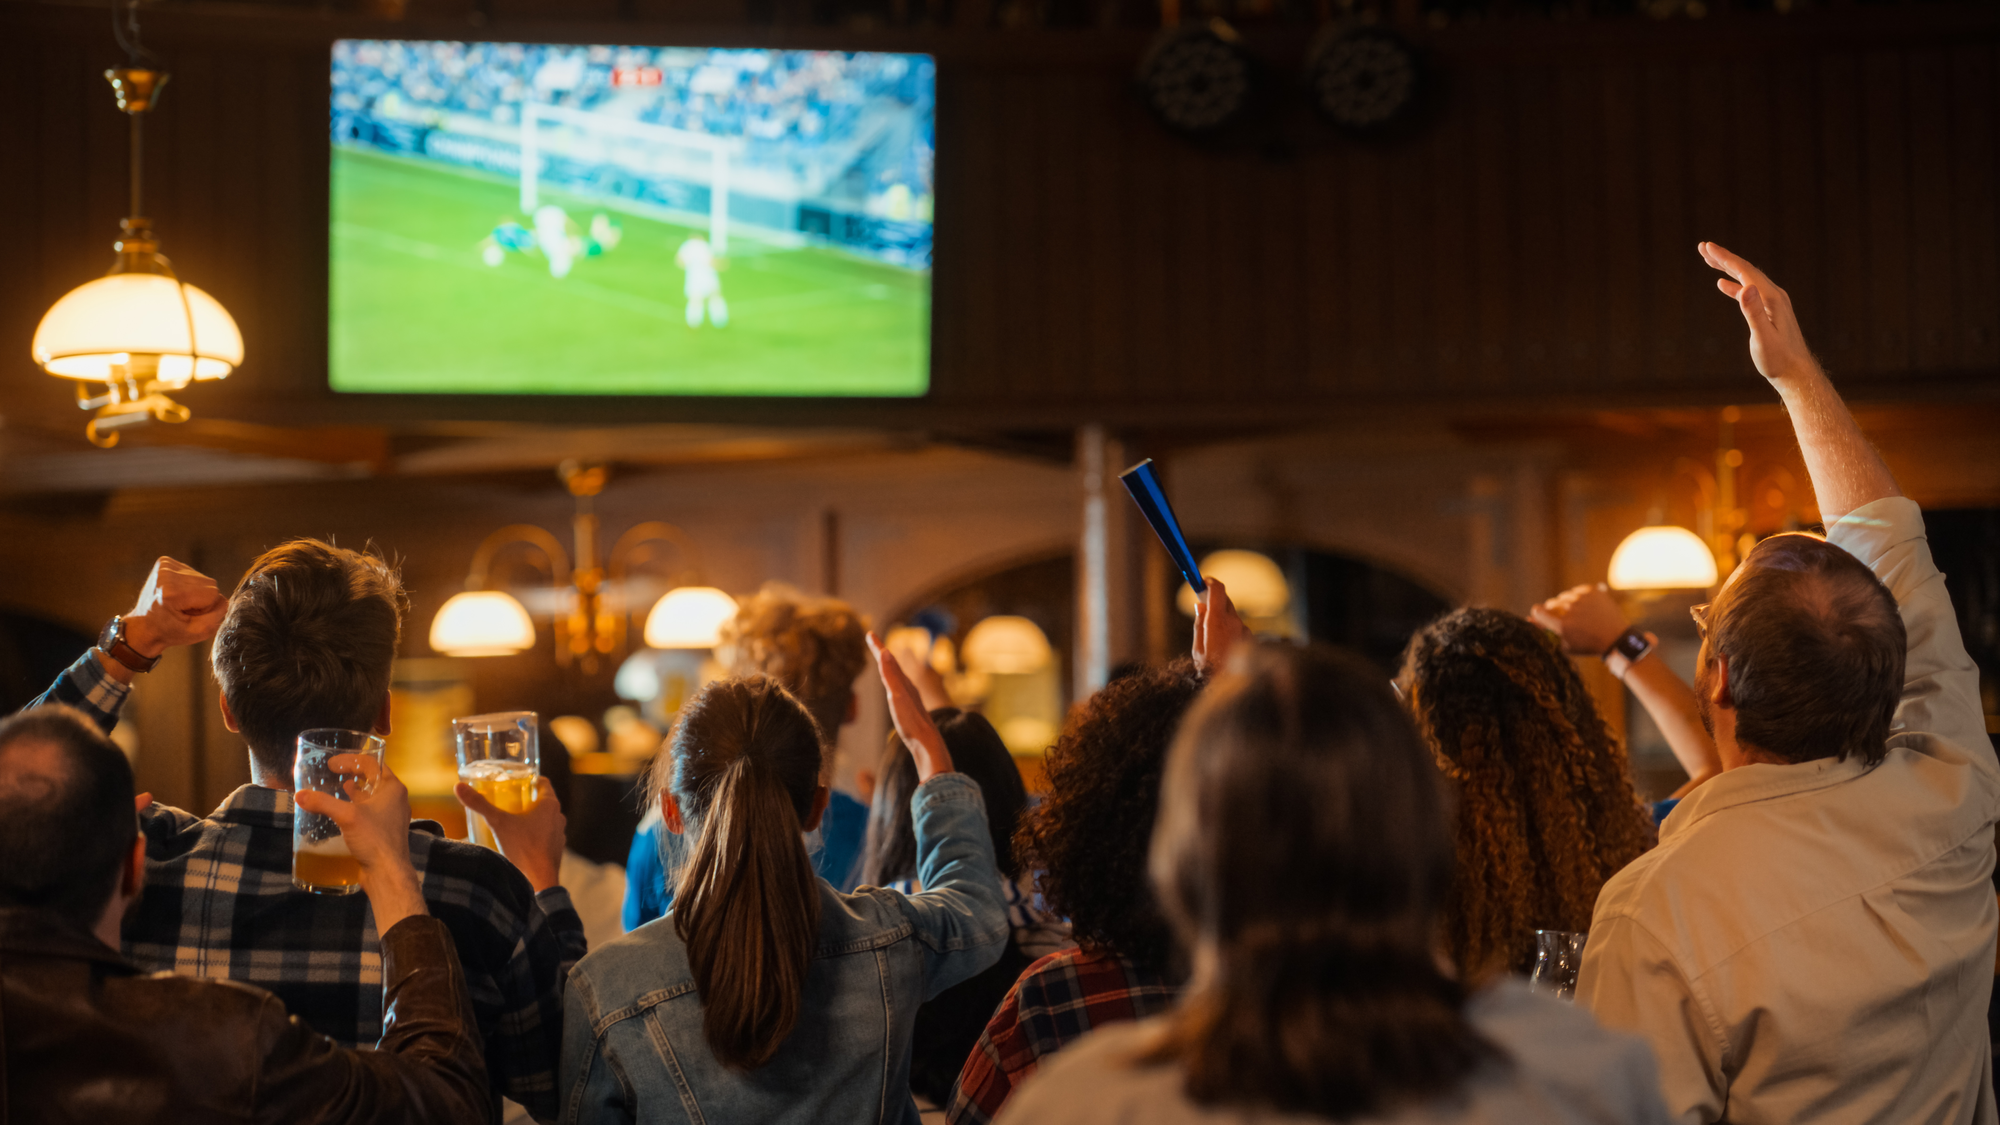 A crowd at a bar watches a soccer match on TV.